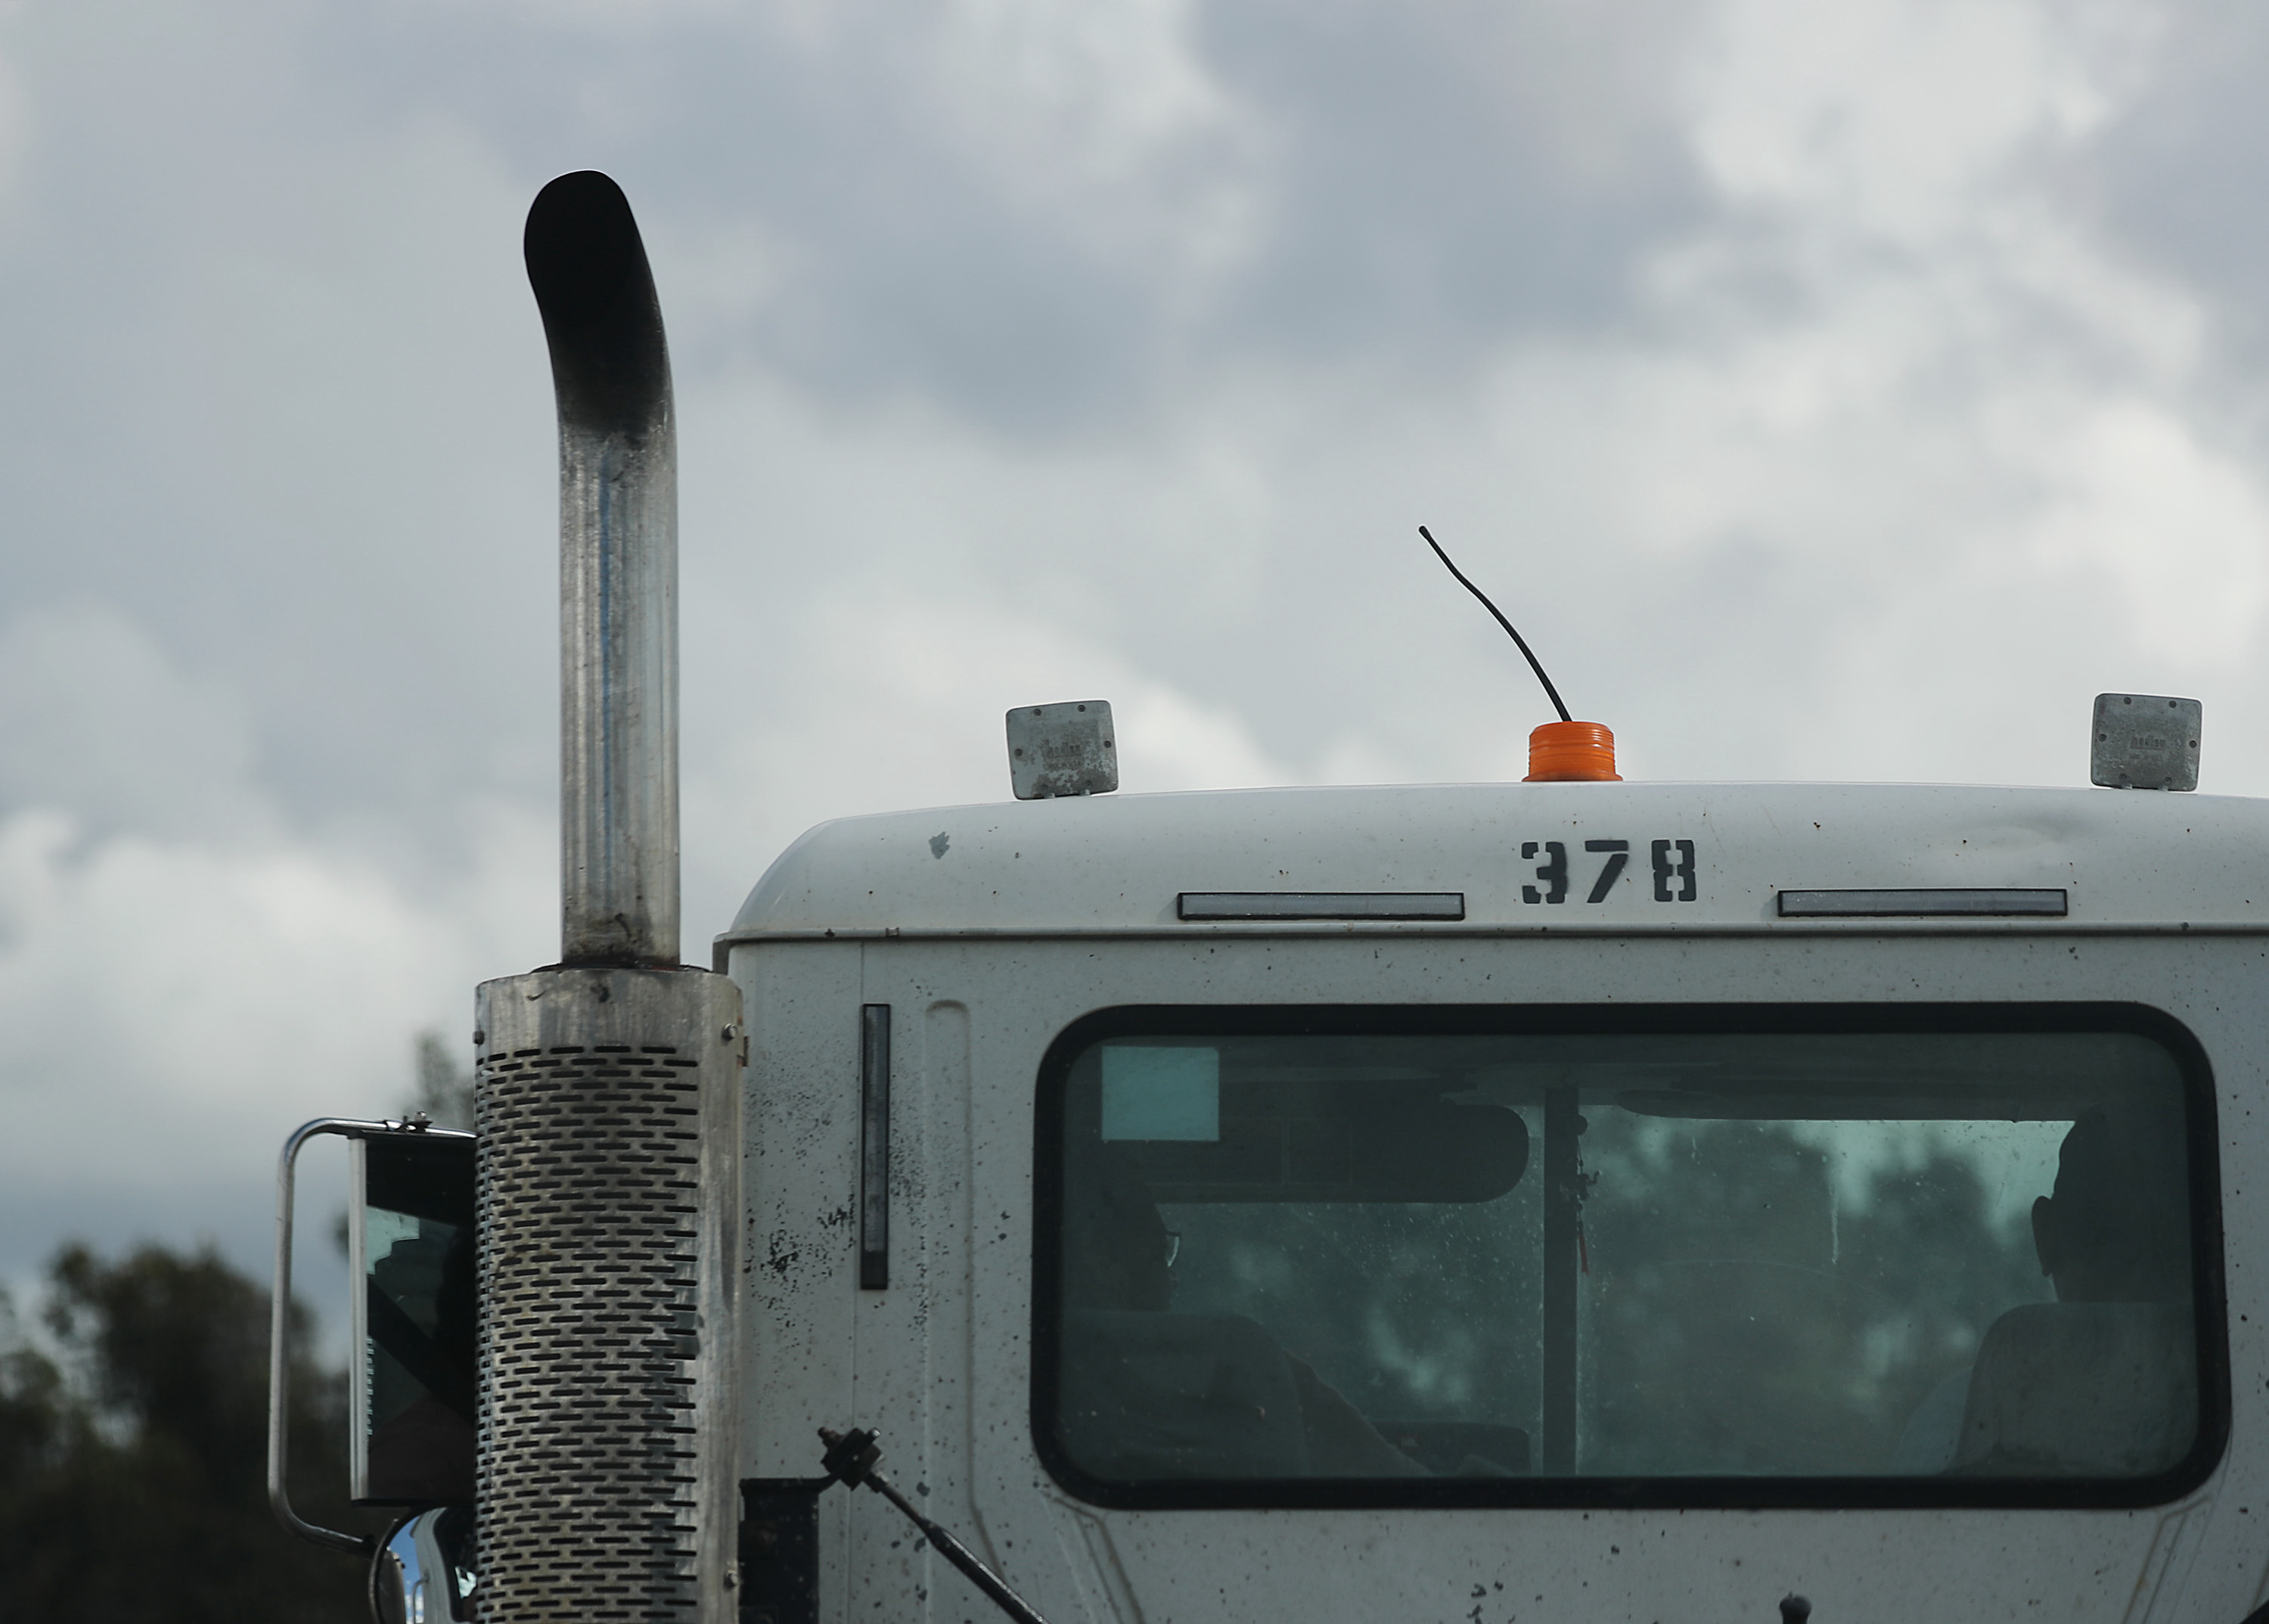 A semi-trailer truck cab and exhaust pipe seen from the rear